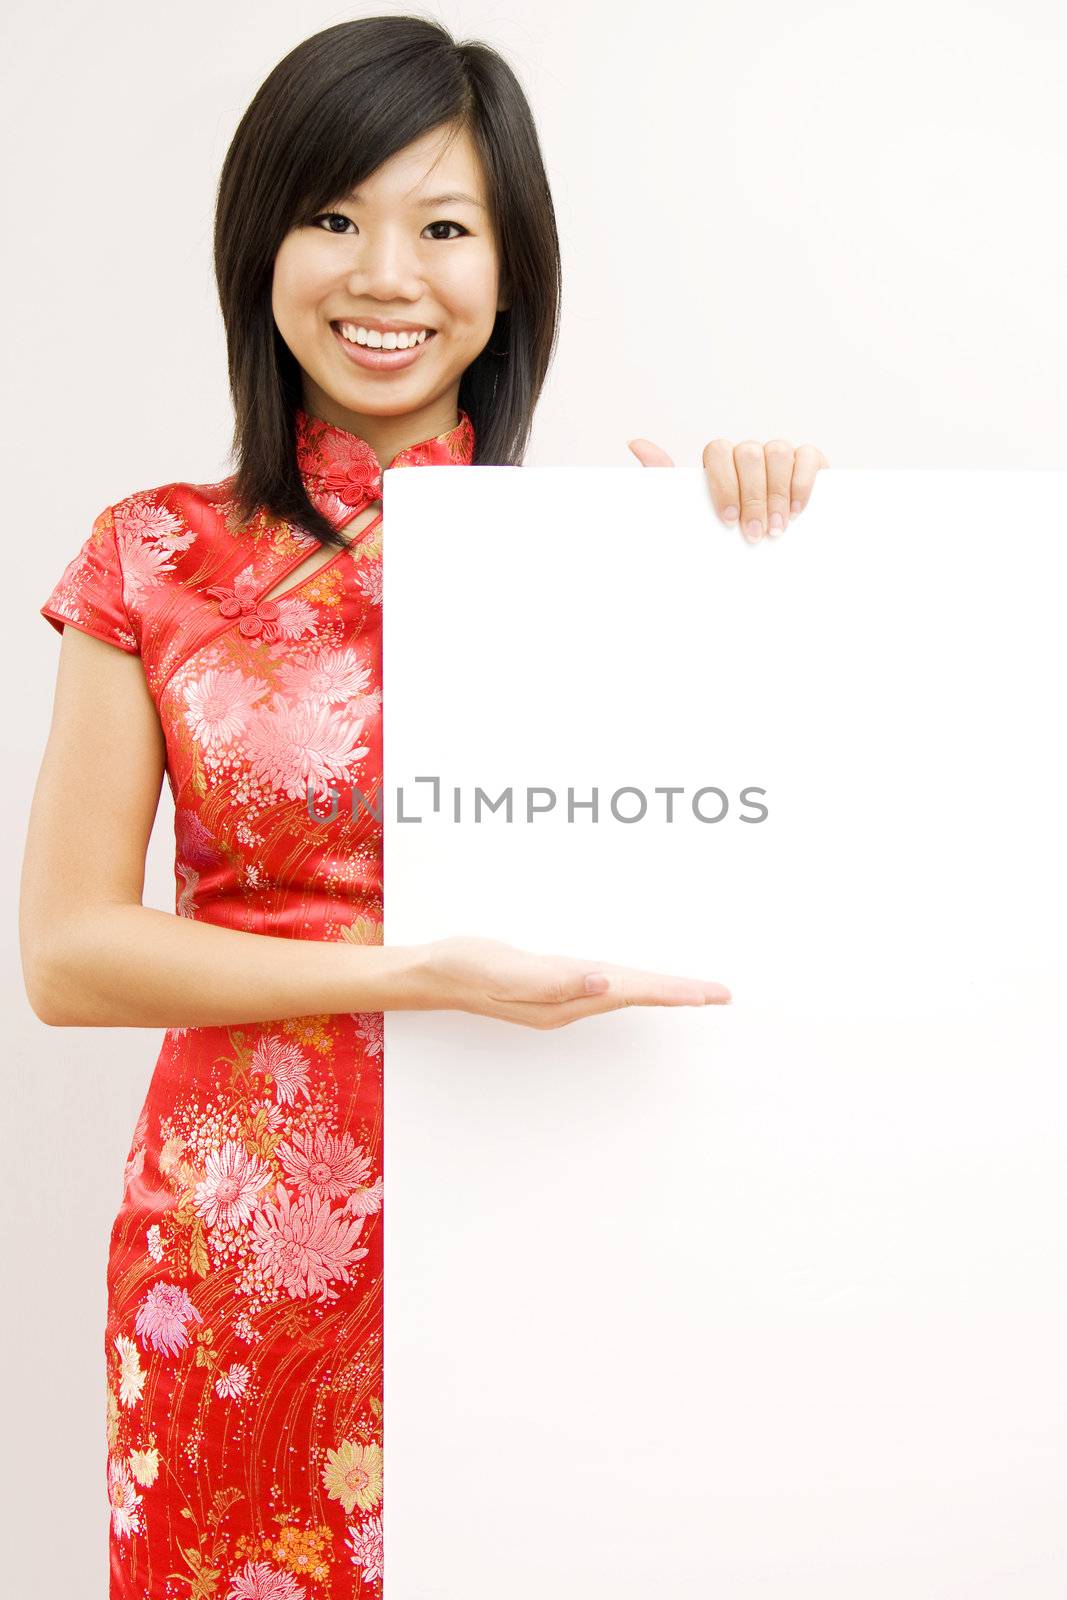 Oriental girl wishing you a happy chinese new year, with copy space. 